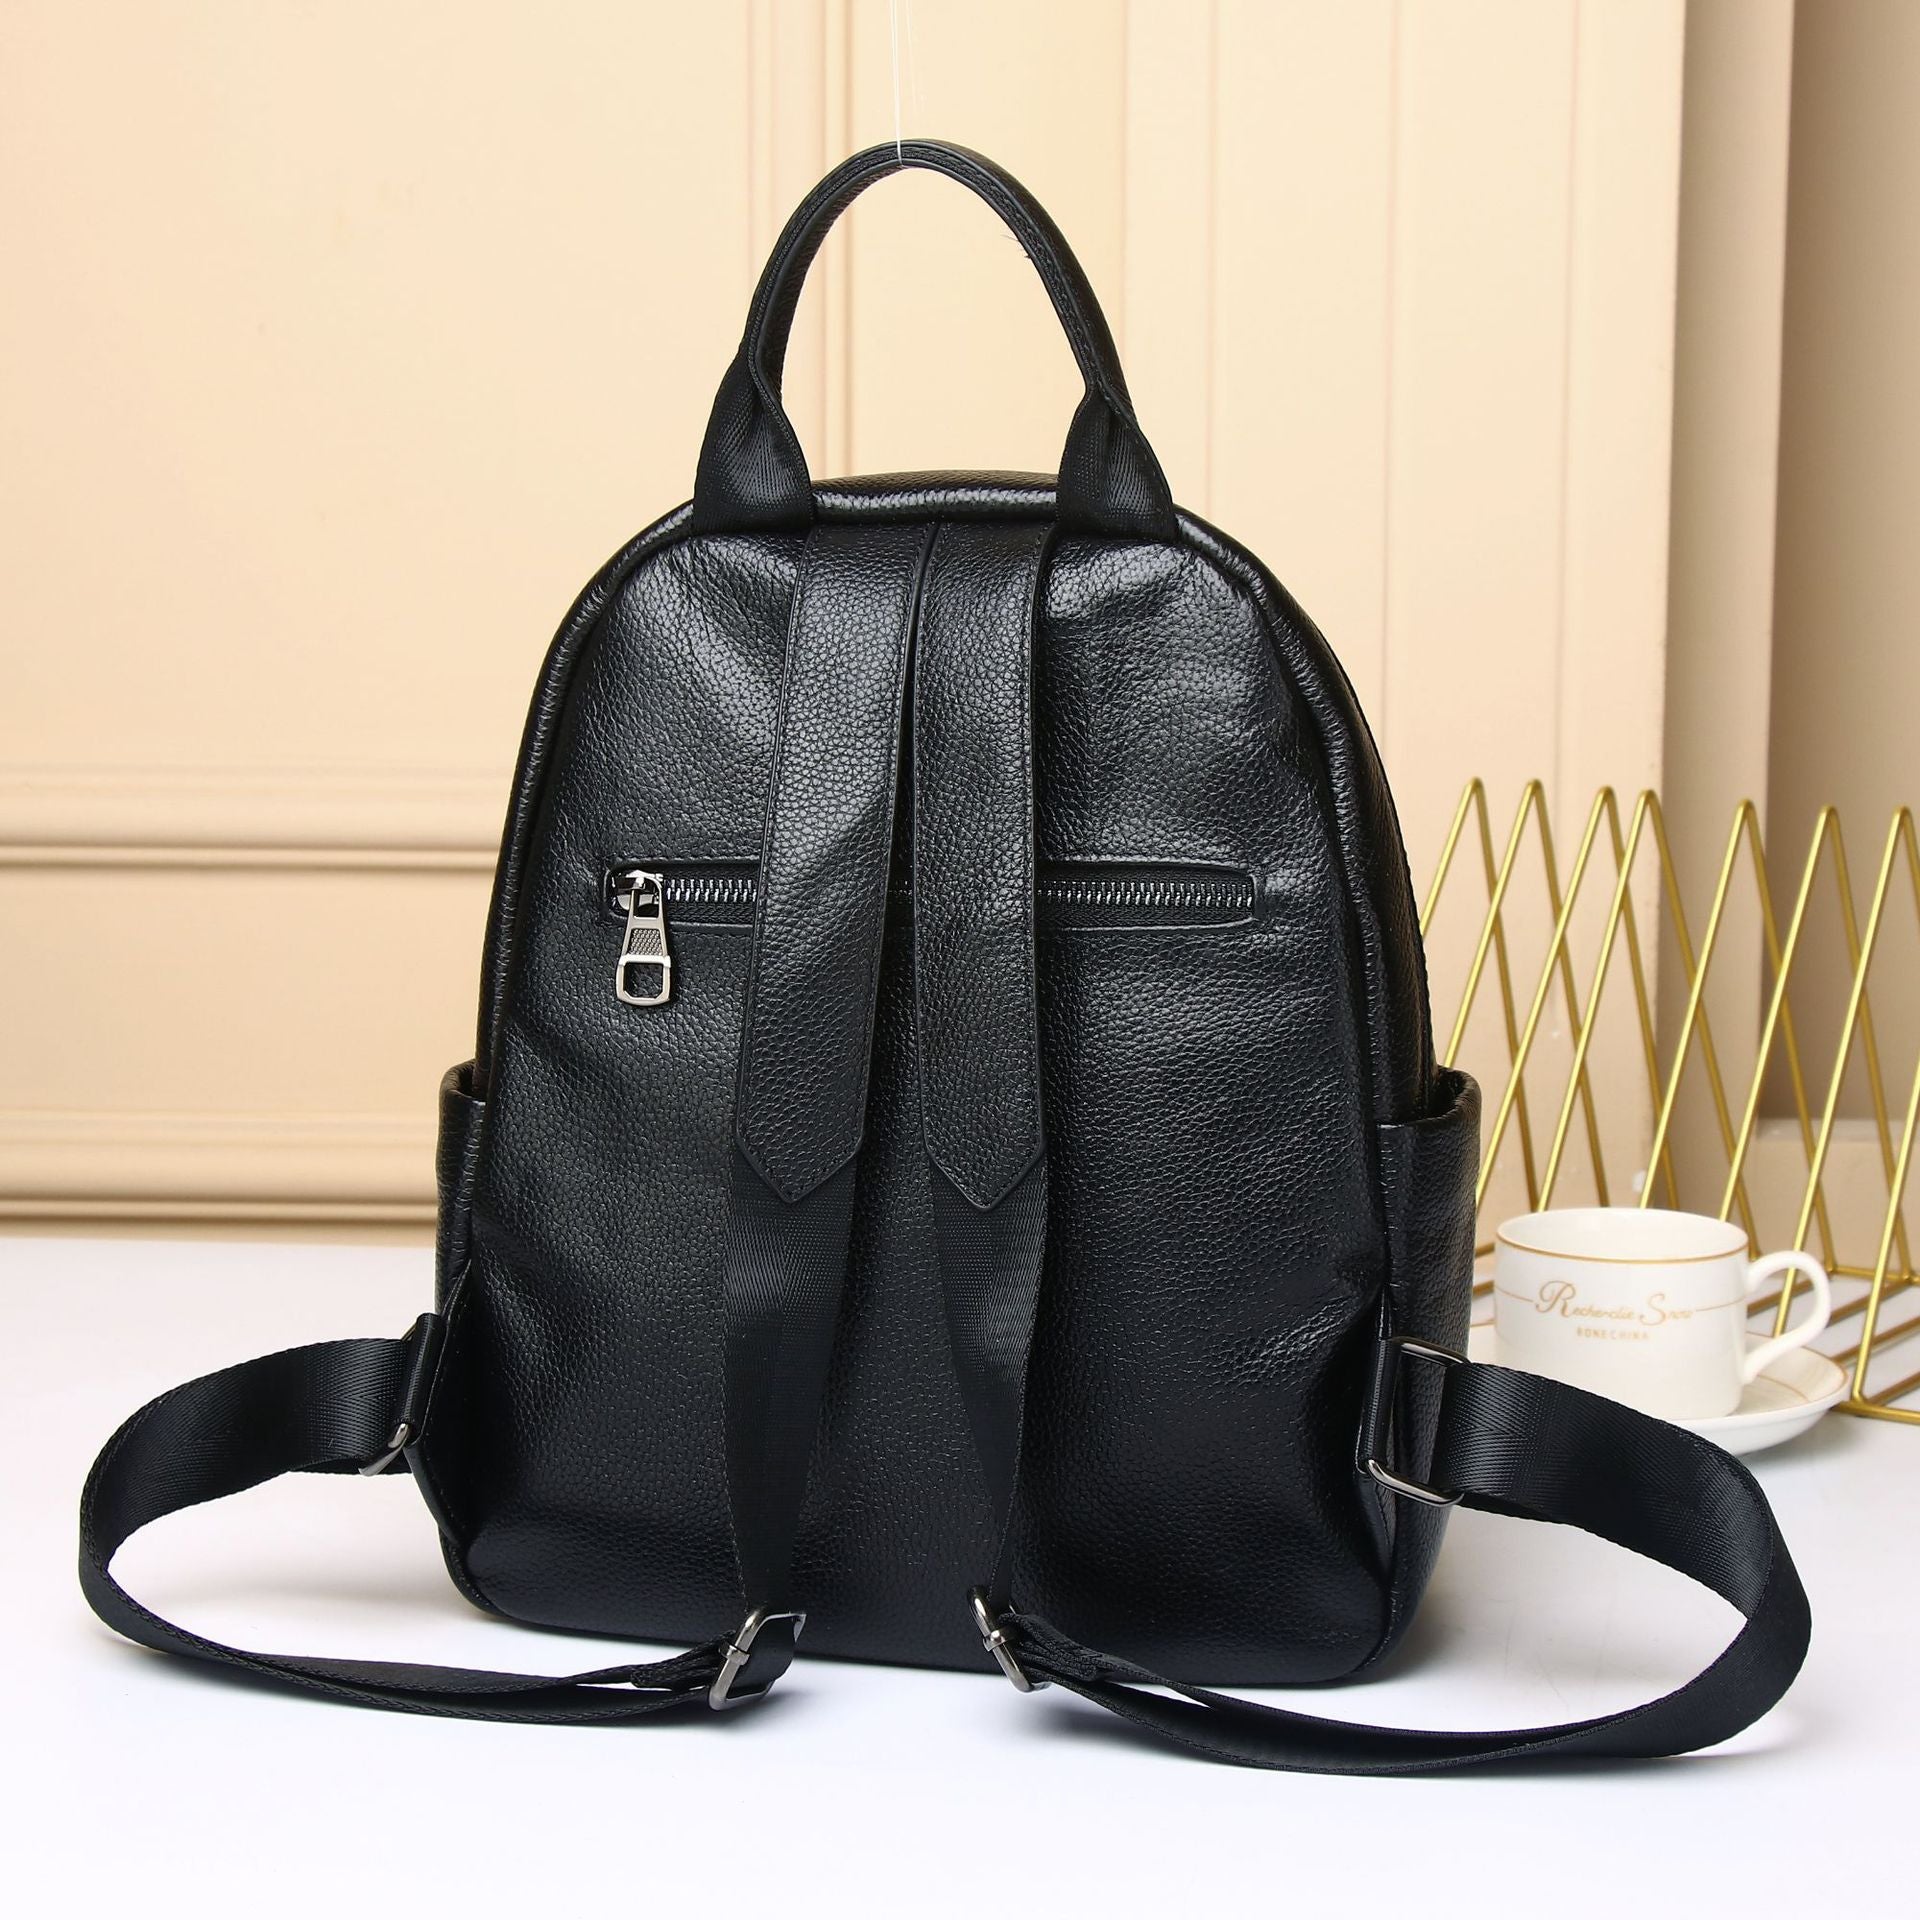 Genuine Leather Backpack  Backpack Soft Leather Lady Travel Bag Small Bags For Women Sac a Dos Casual Mochilas School Bags